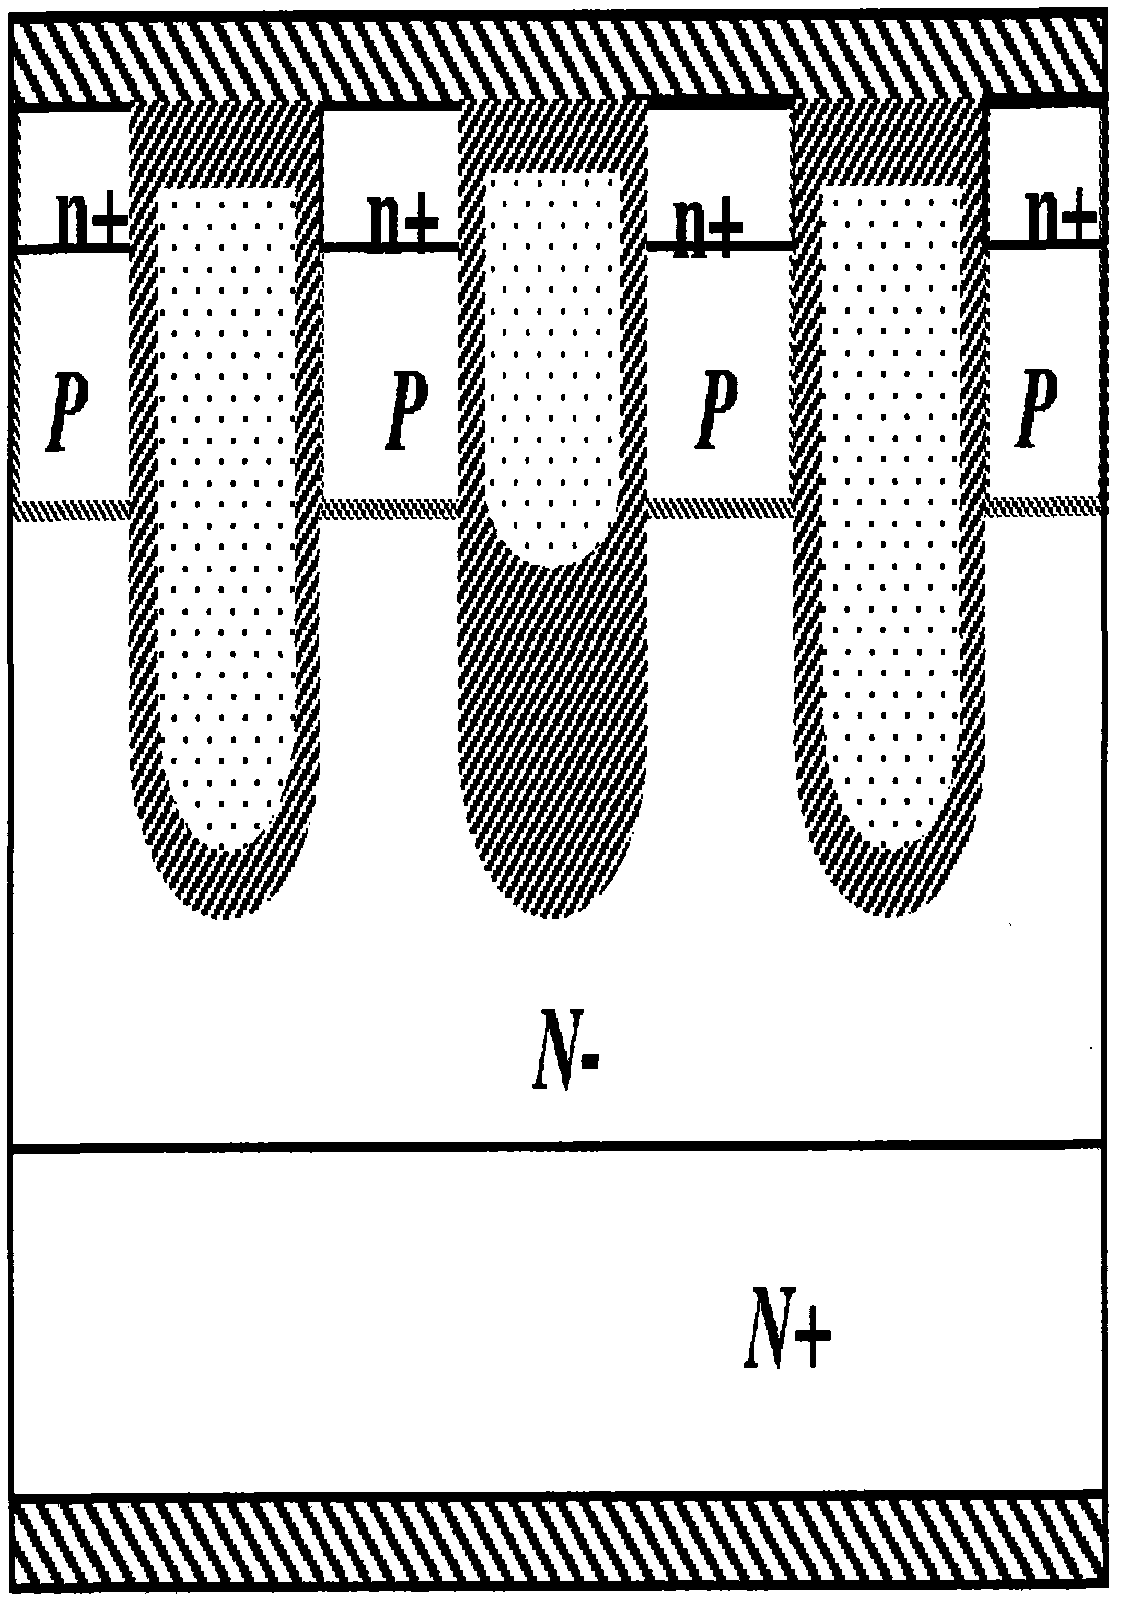 Semiconductor device structures and related processes